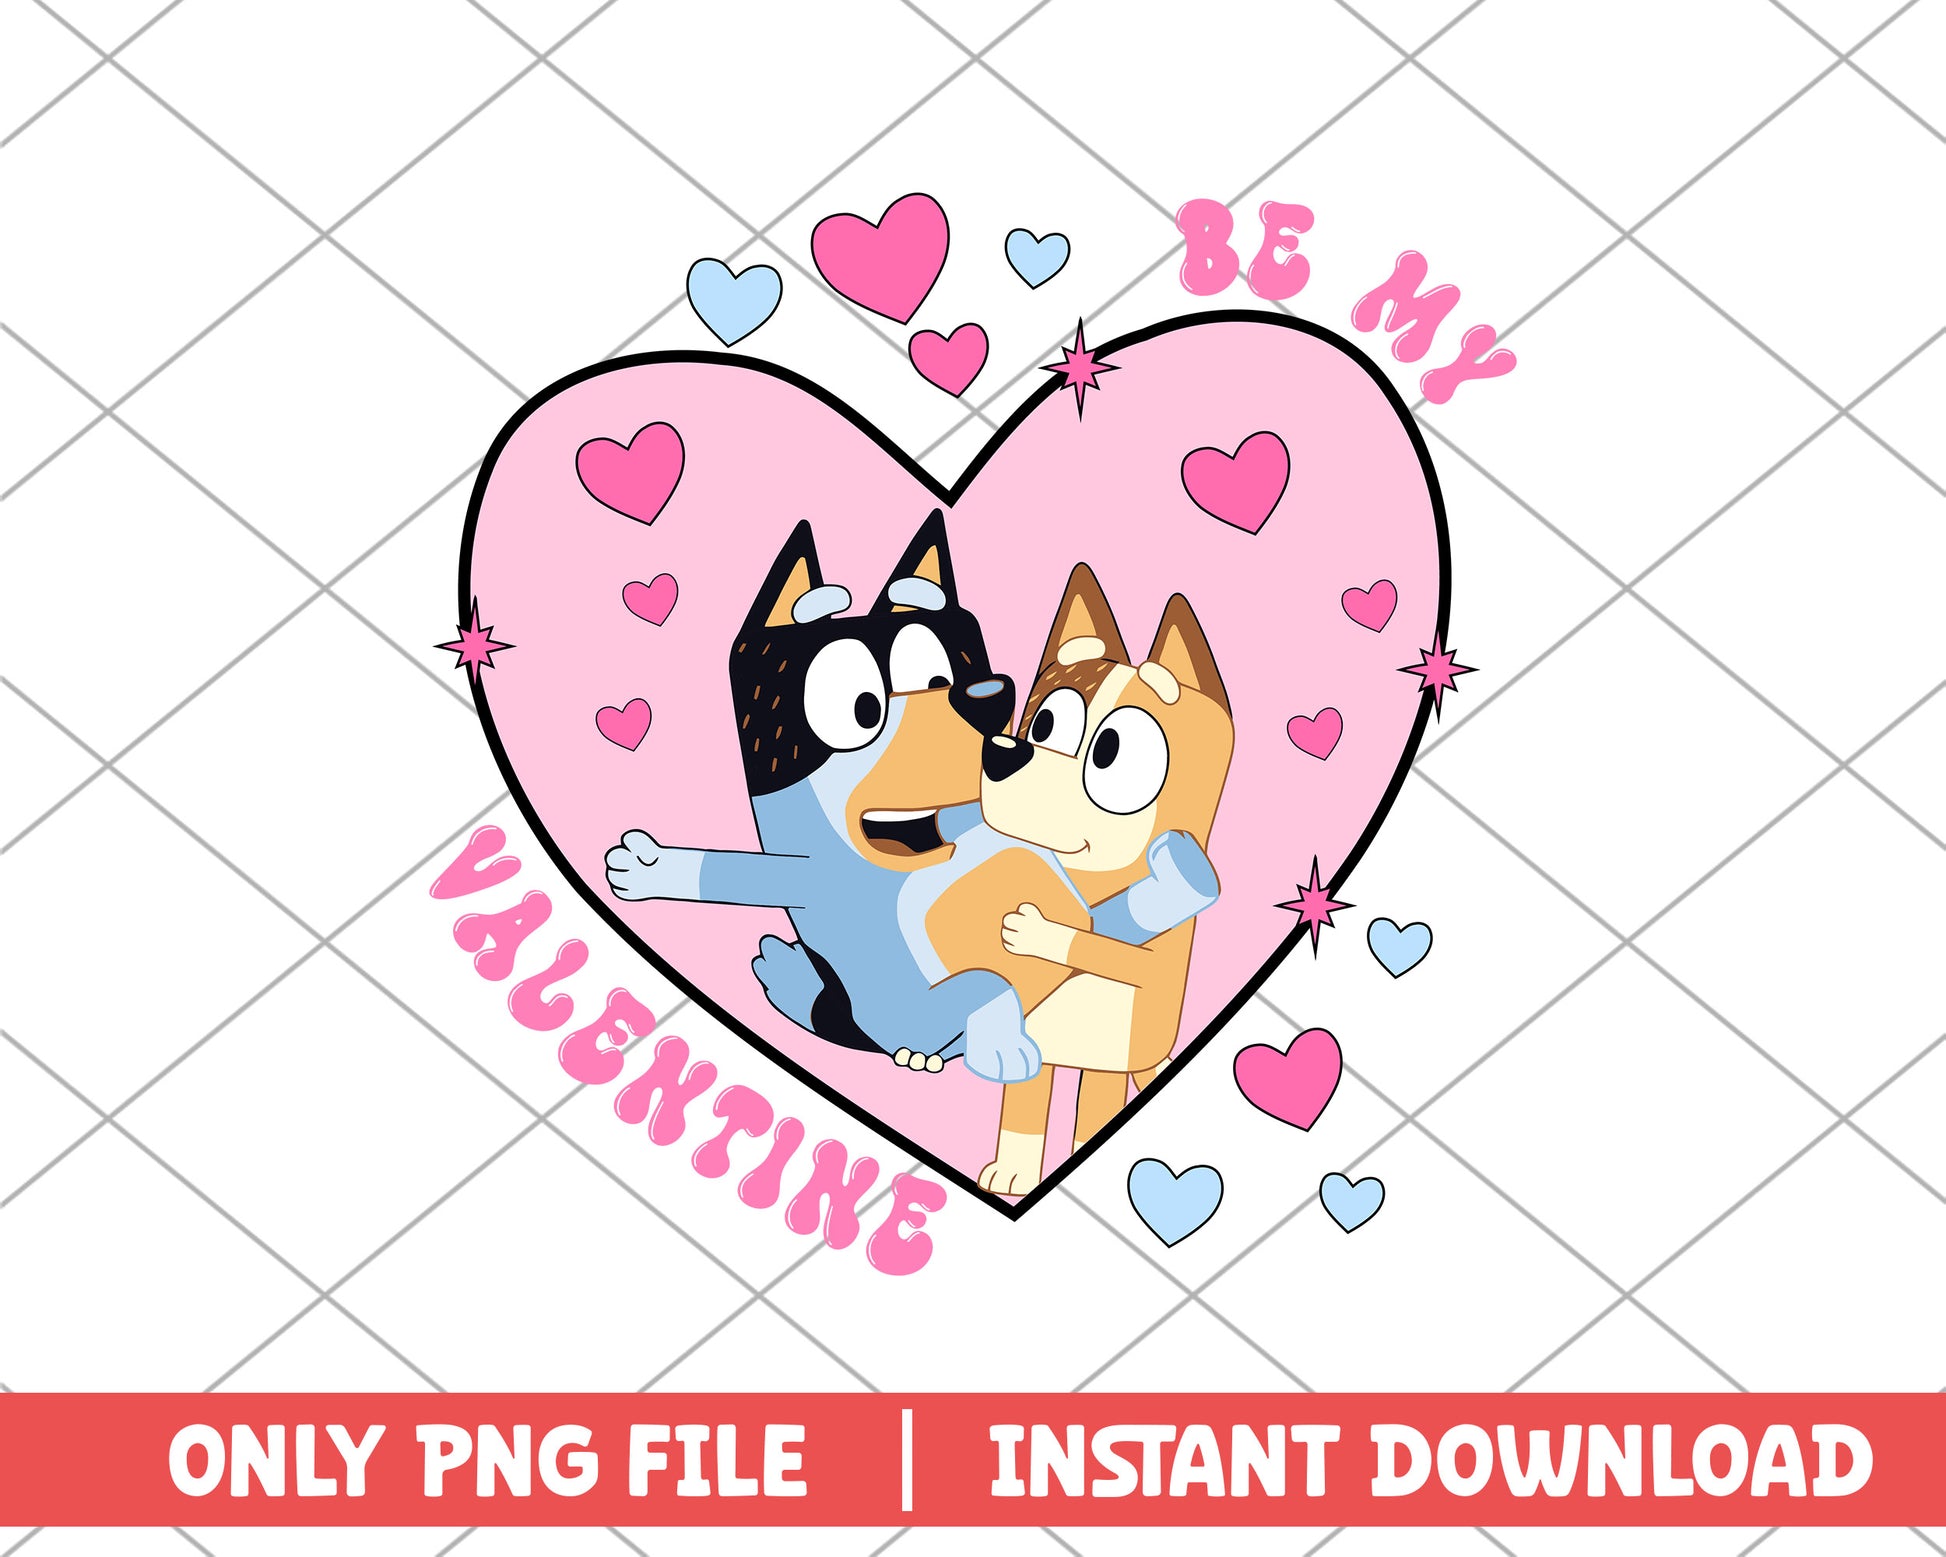 Dad and mom be my valentine cartoon png 